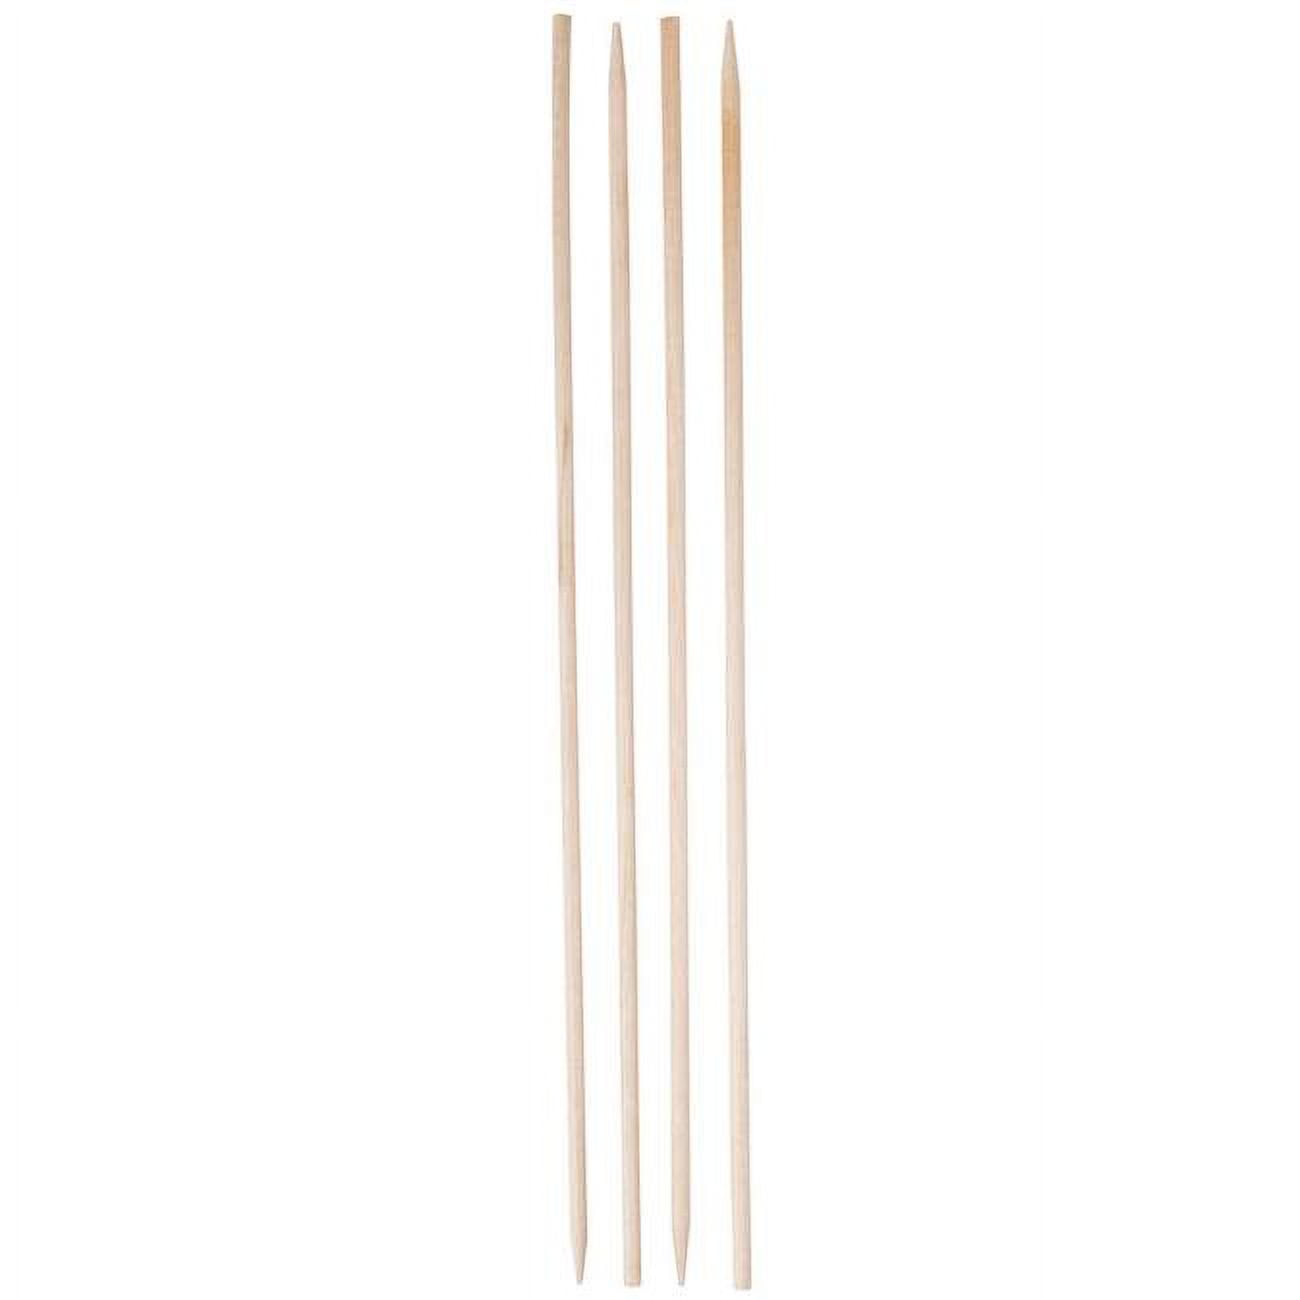 Inc Ws10 Wood Skewer 10 In. Finish Shish - Case Of 3000